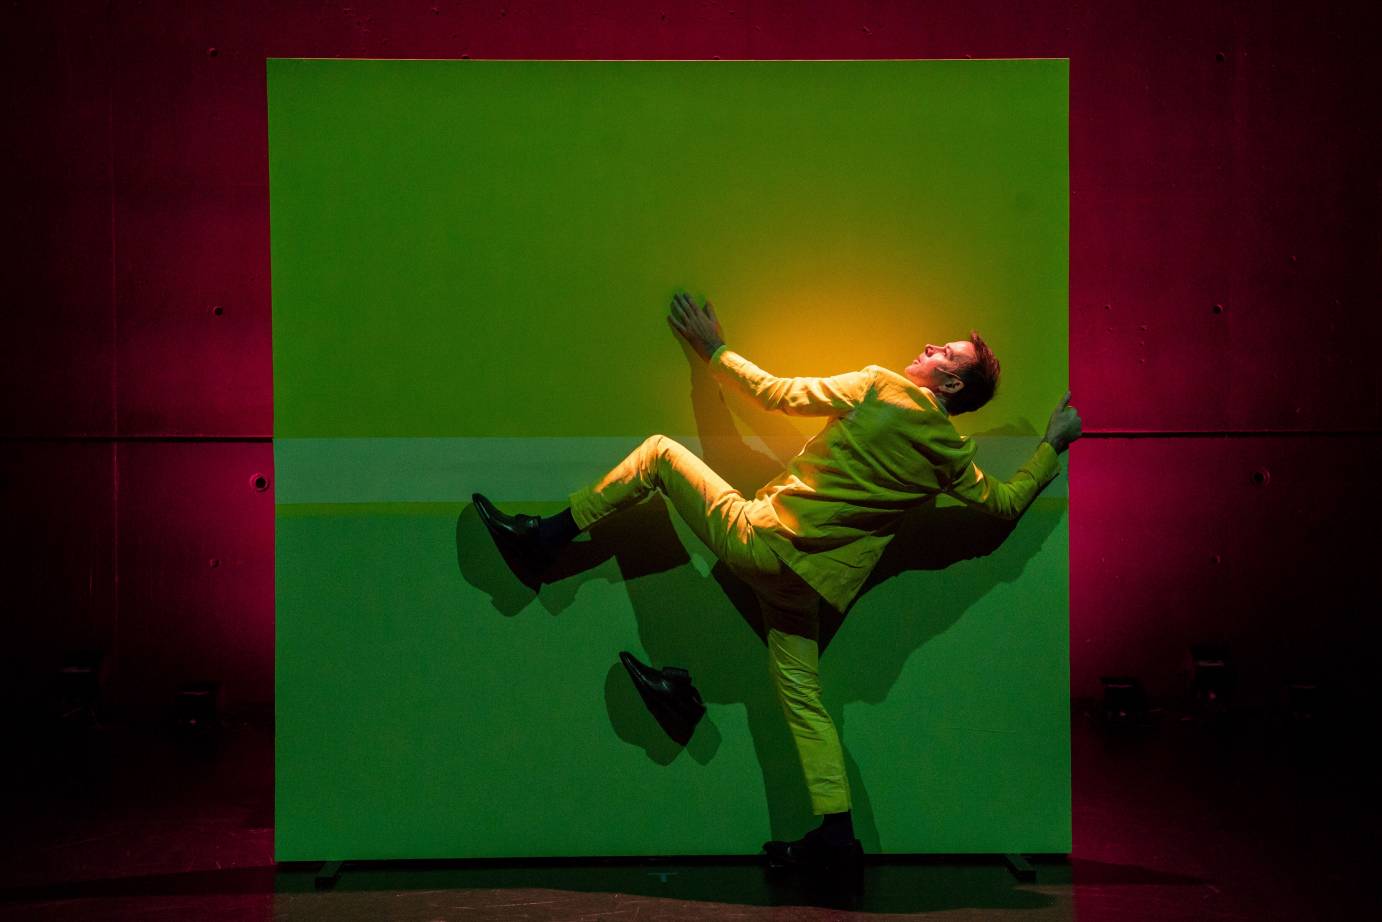 A man in a yellow suit tries to climb a green-lit wall